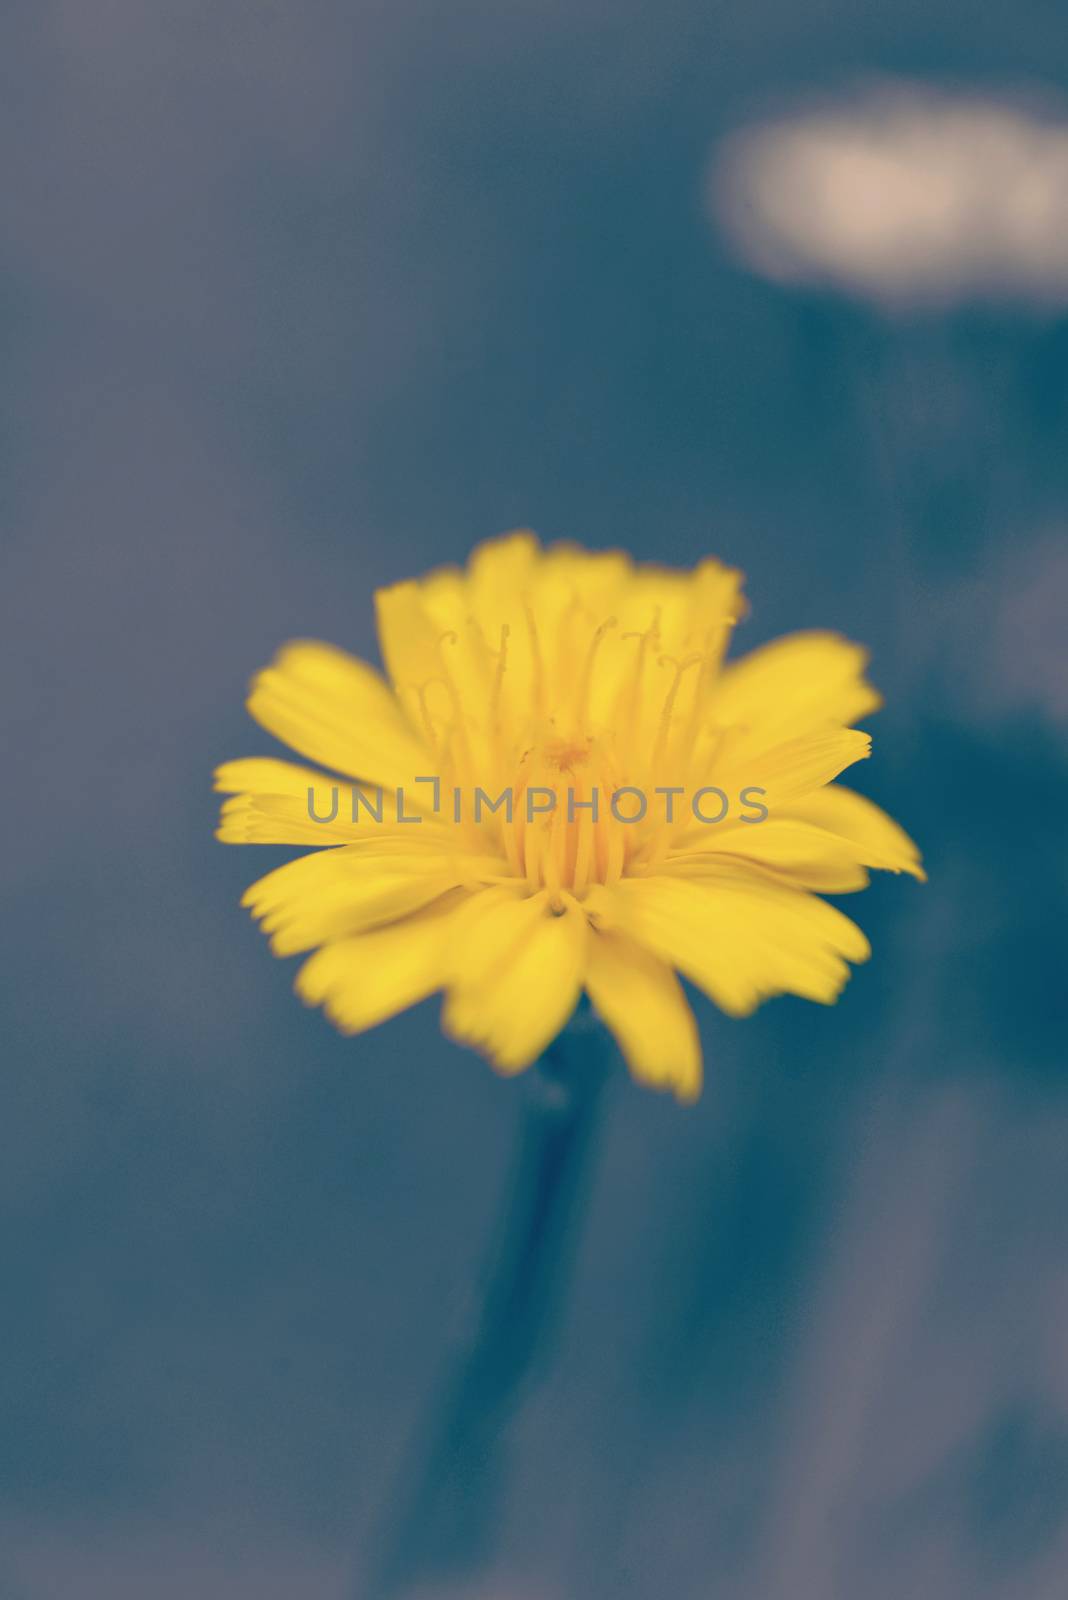 Bright yellow flower on blur background with vintage filter effect. 